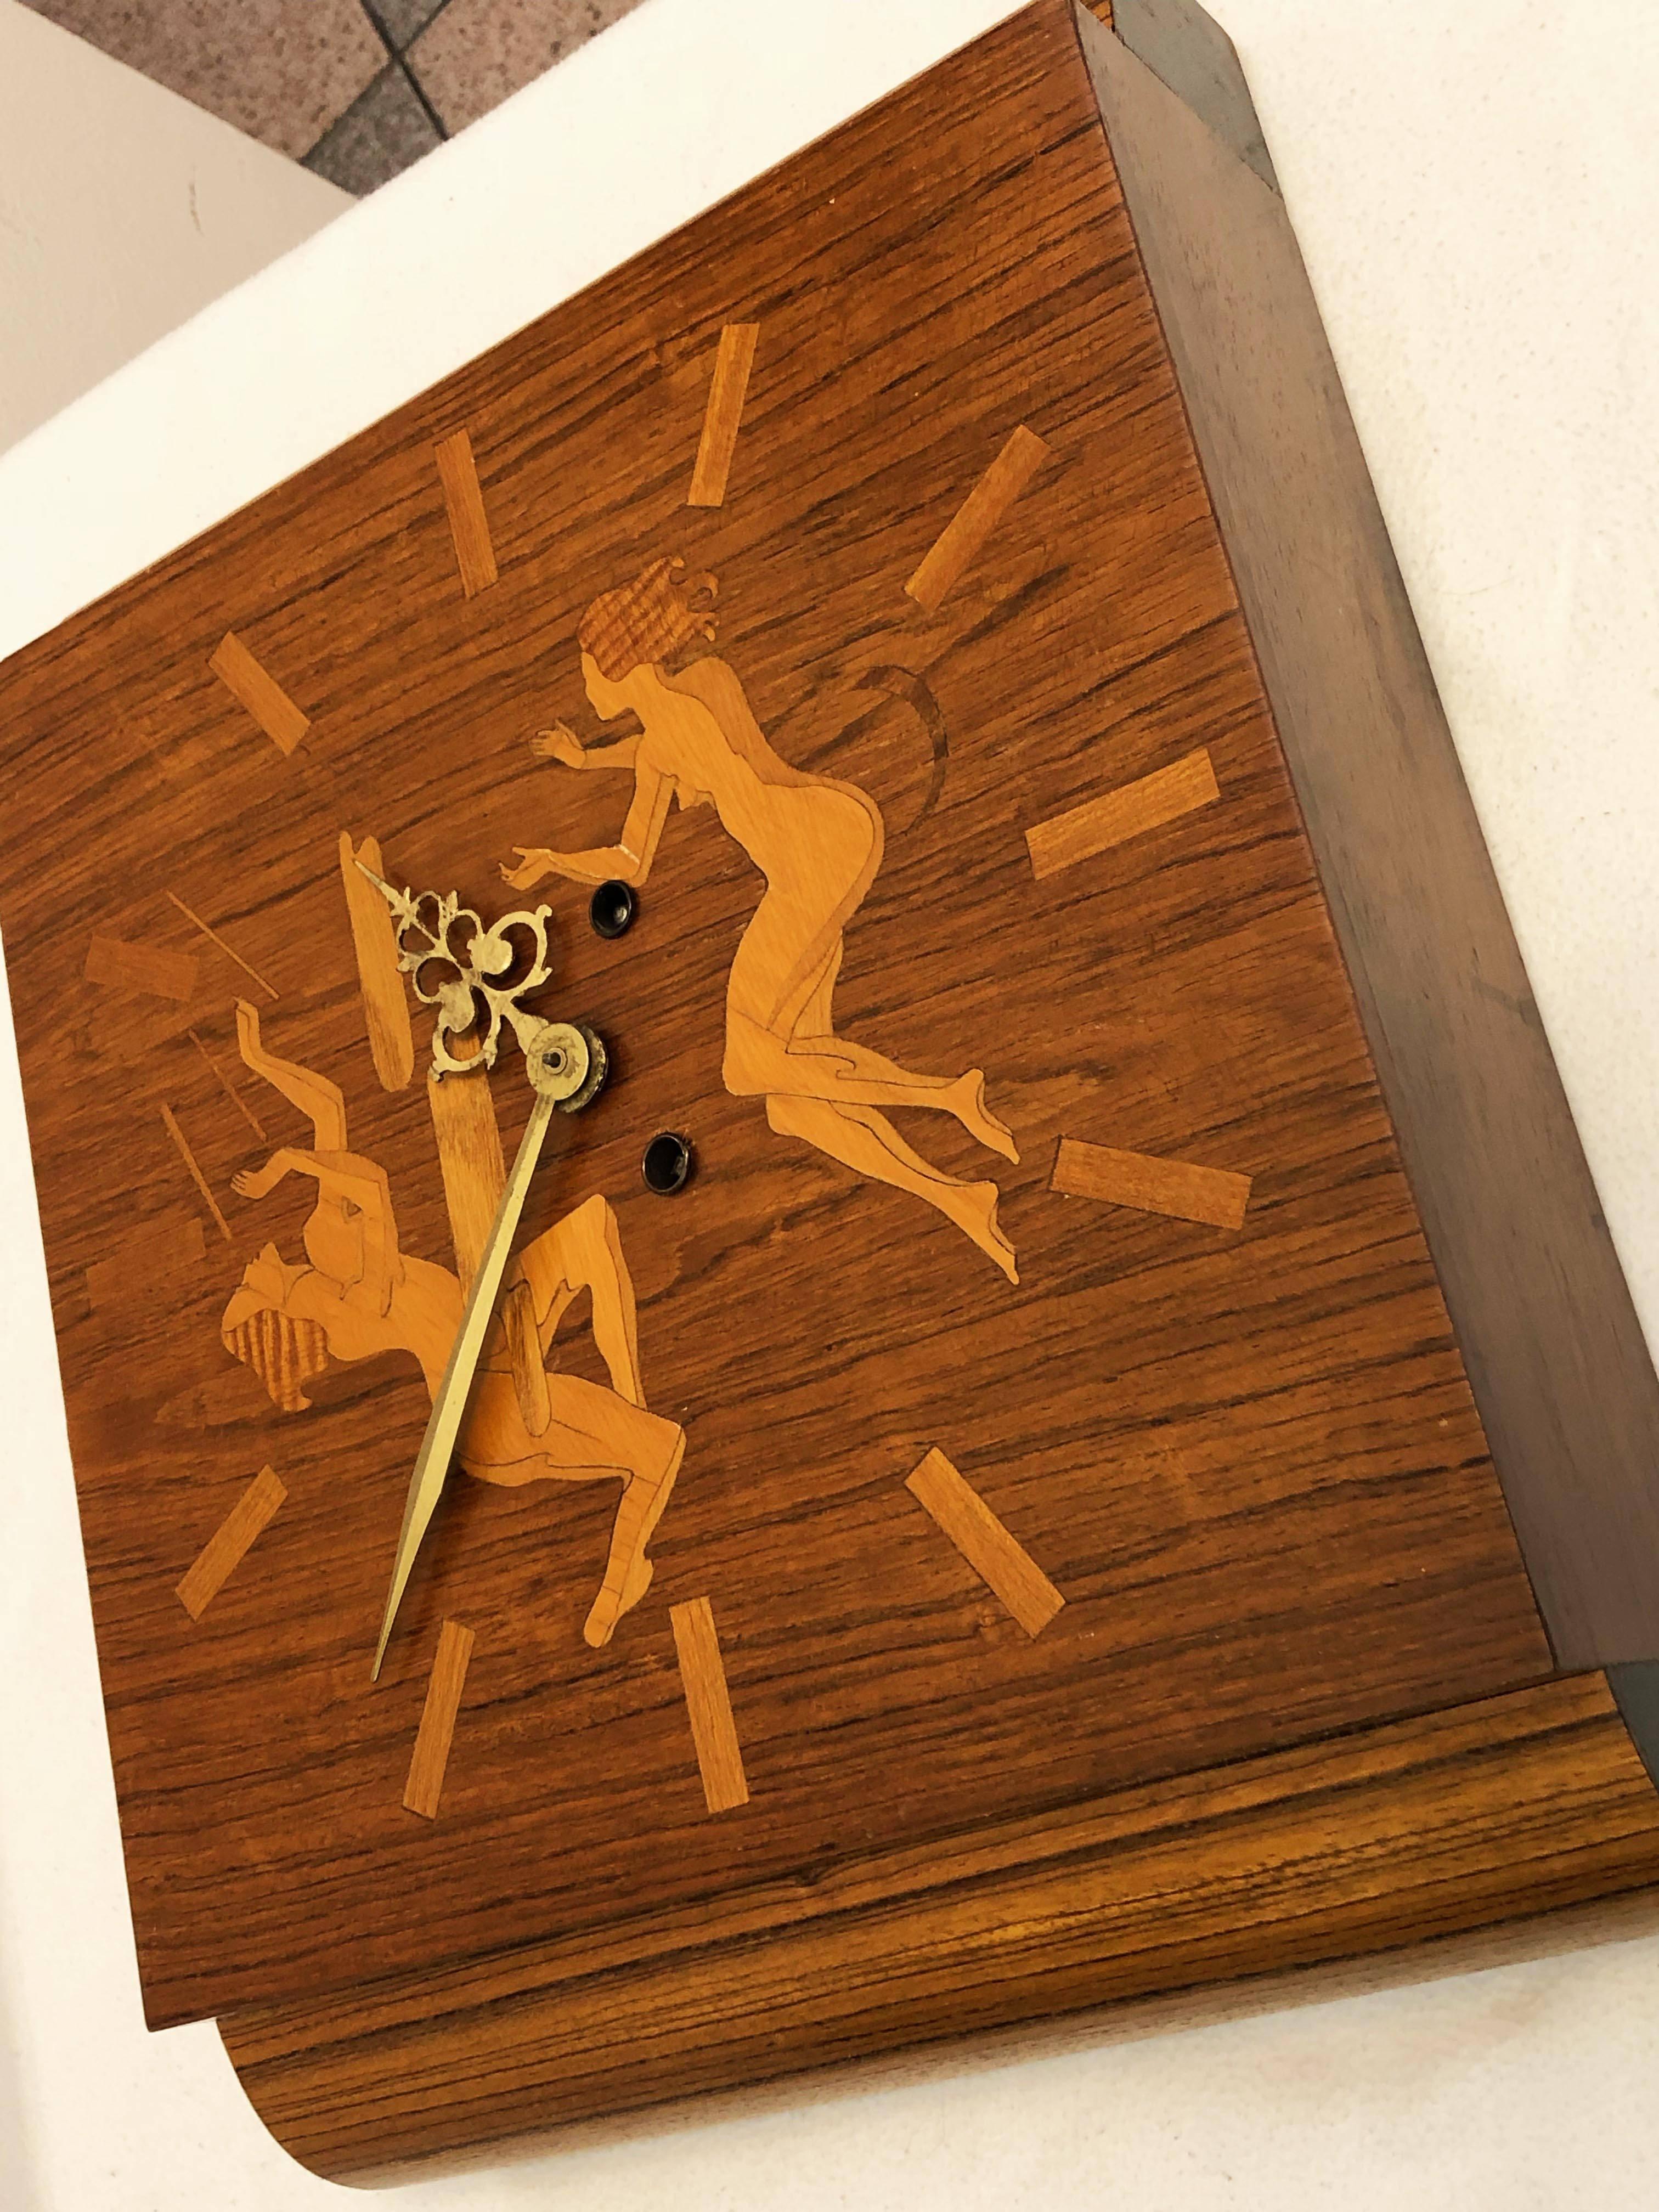 Mid-20th Century Wall Clock Attributed to Mjolby Intarsia from the Late 1930s For Sale